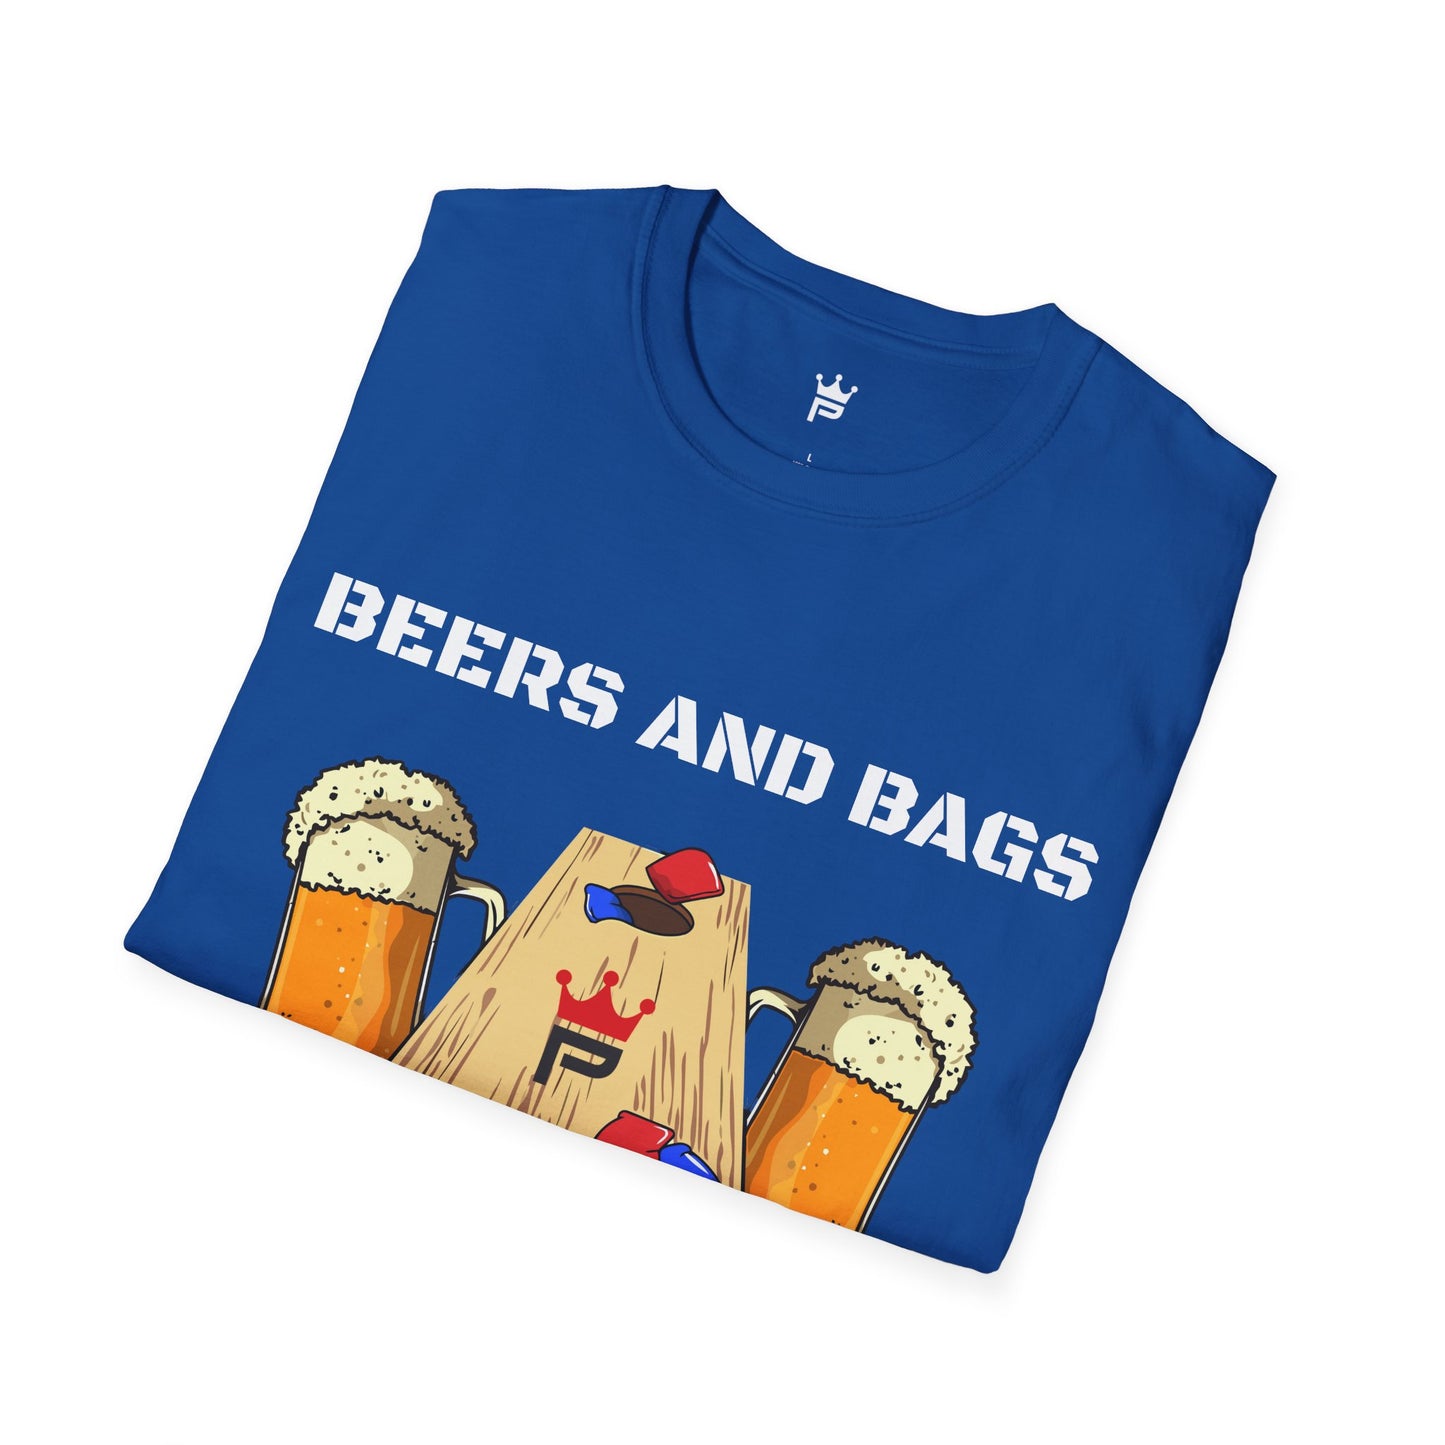 BEERS AND BAGS T-SHIRT